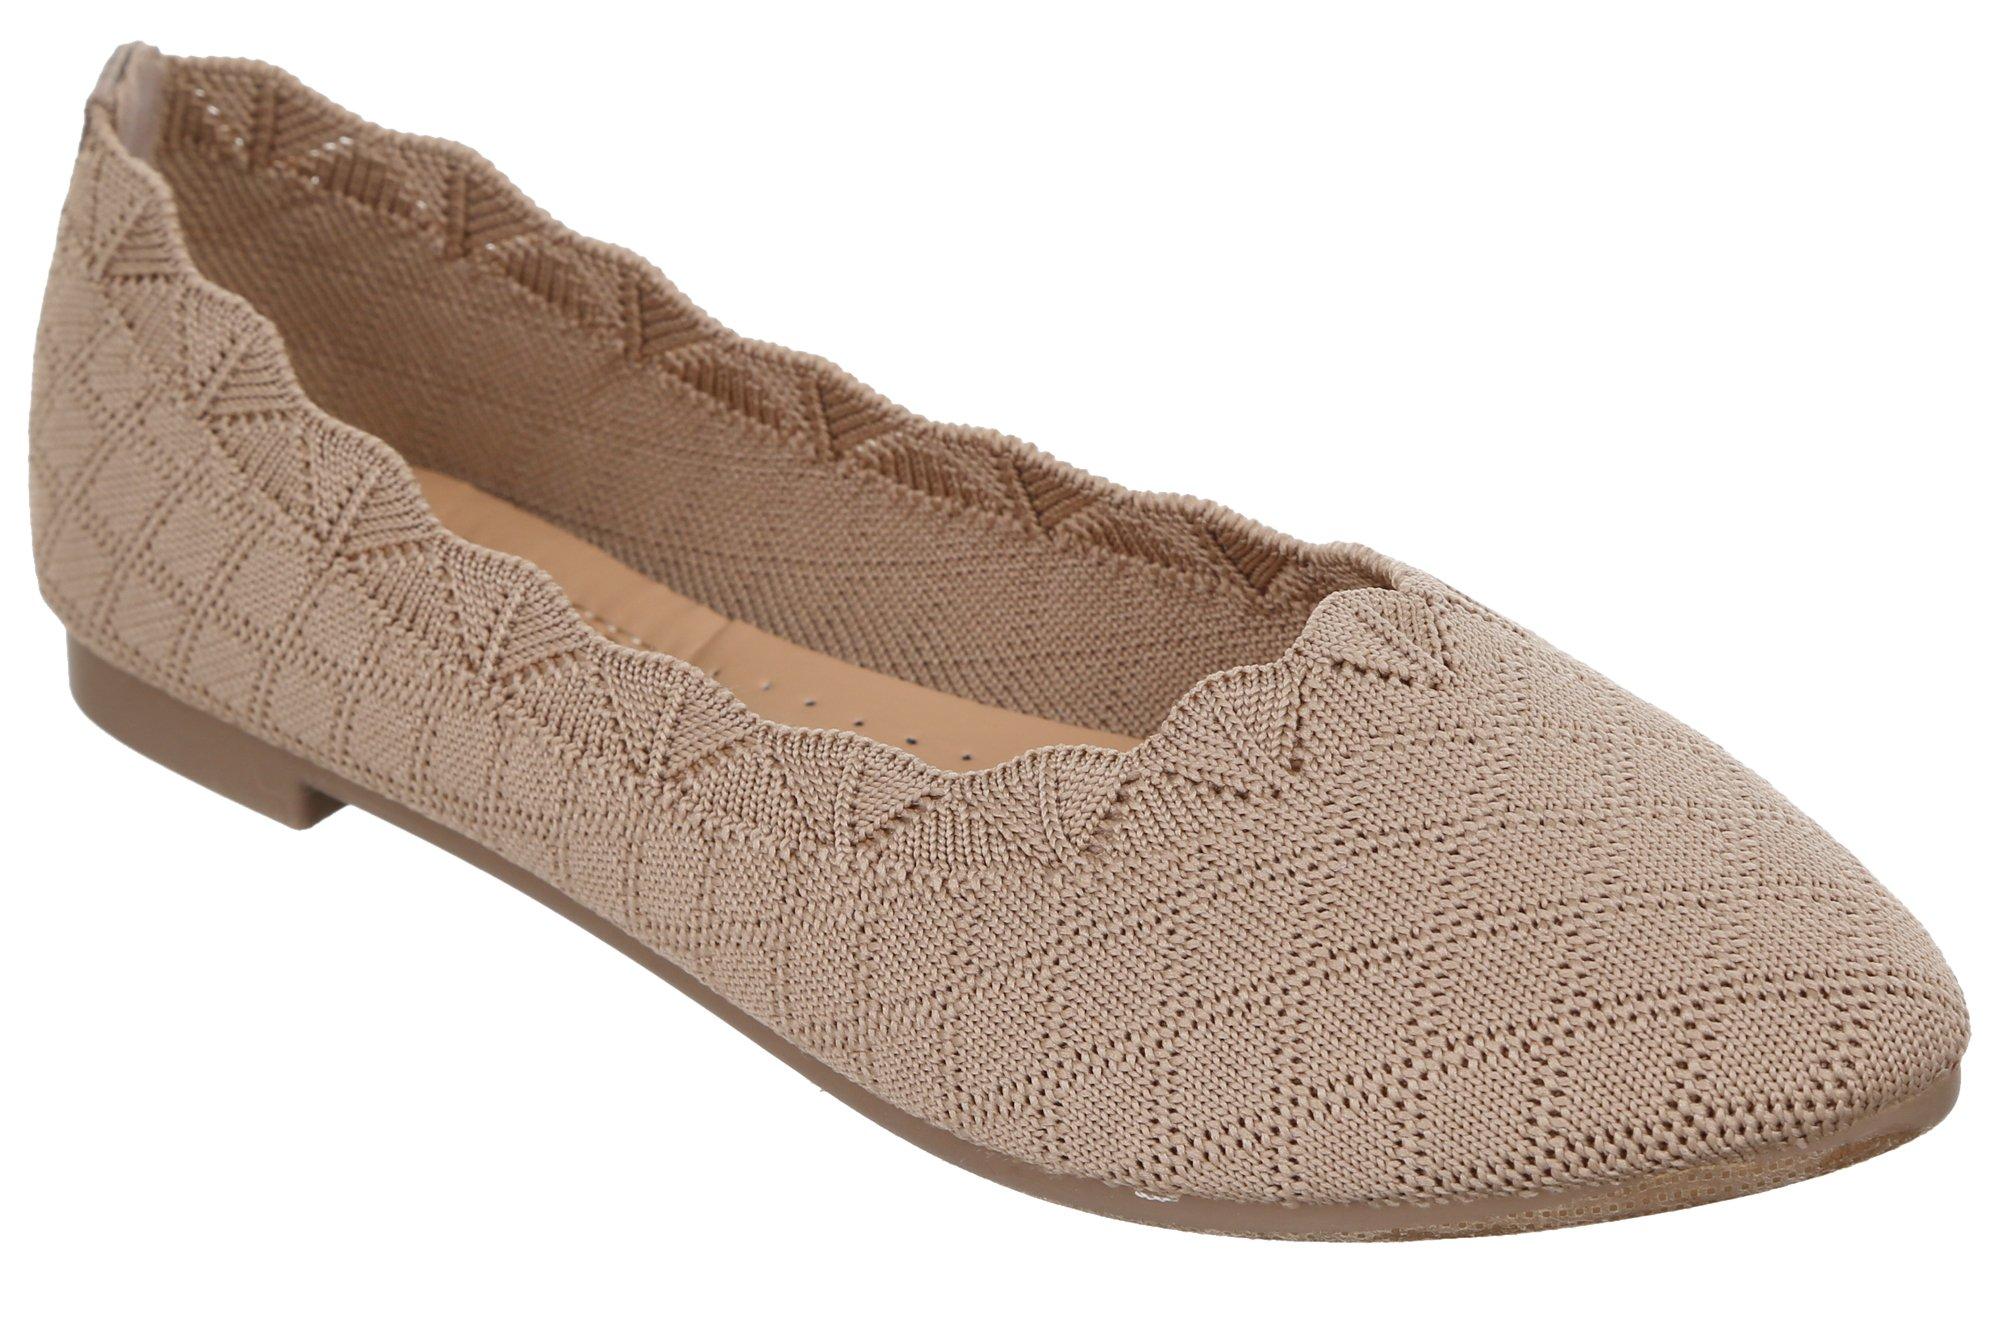 Women's Perforated Scallop Trim Flats - Taupe